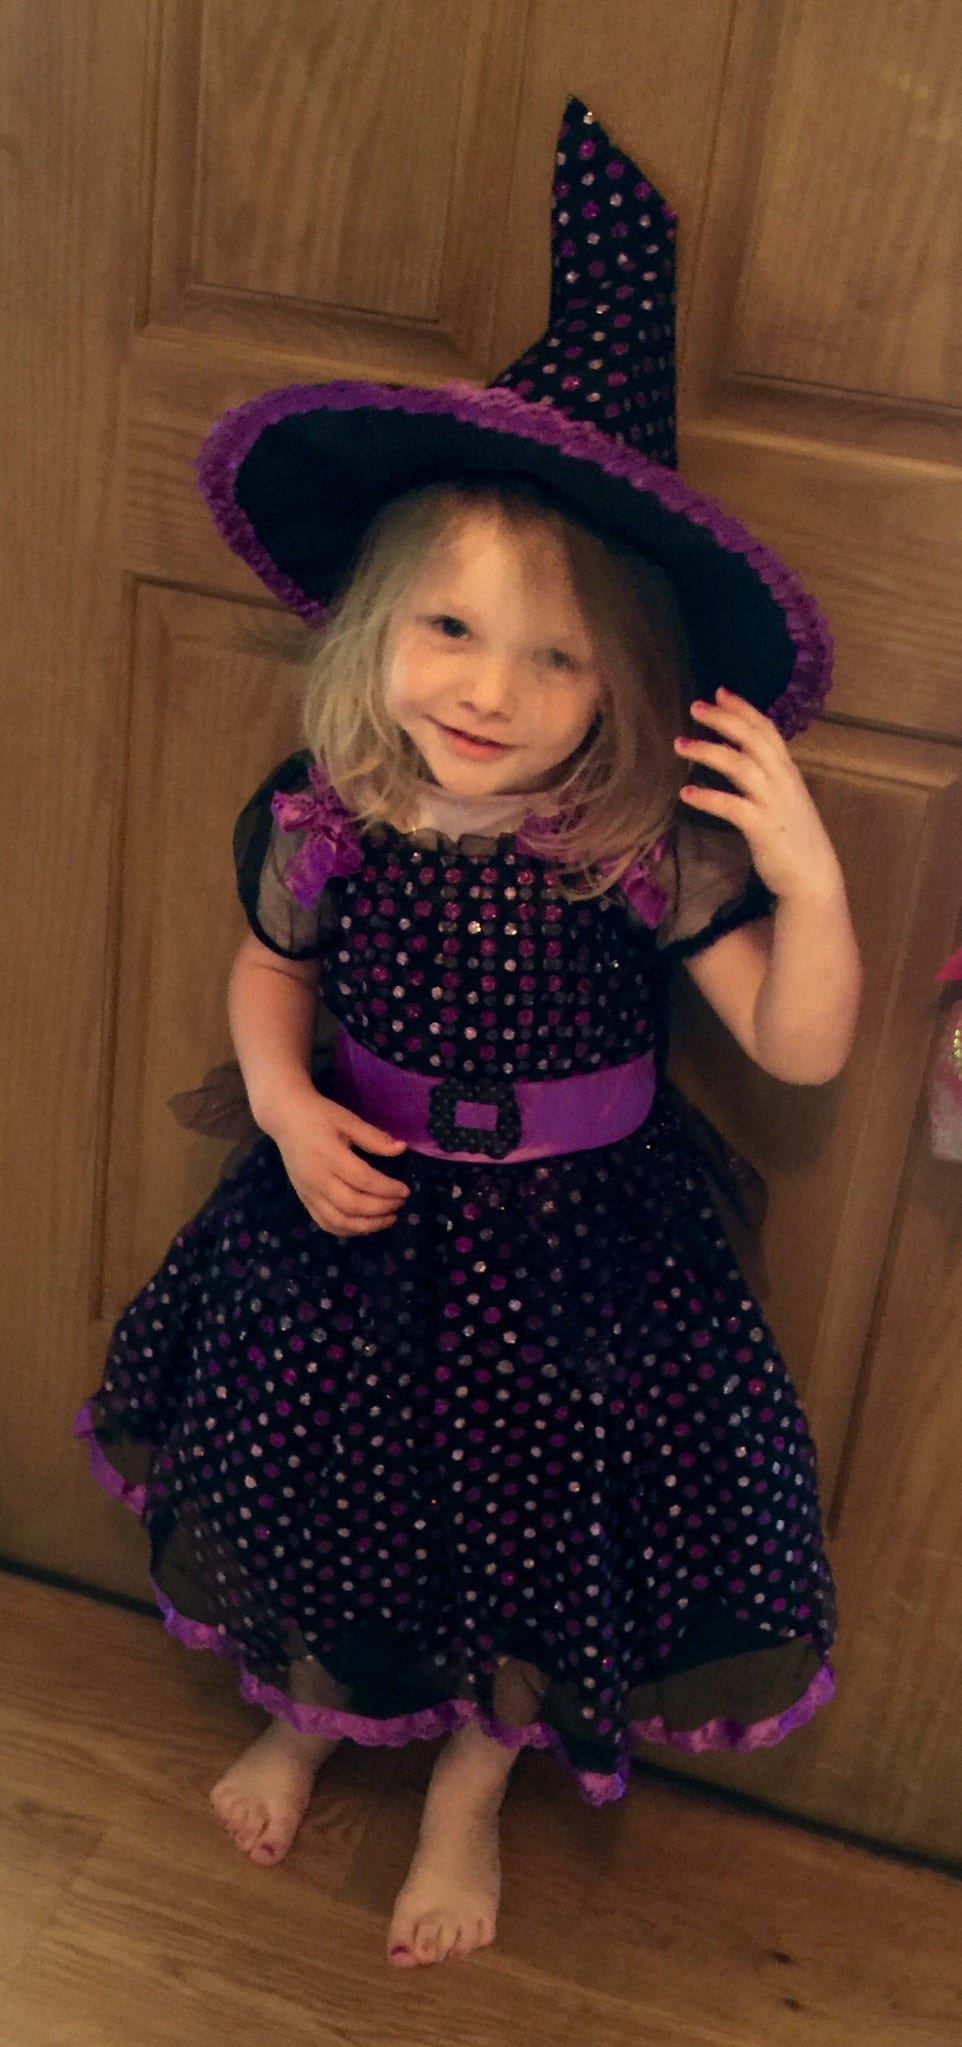 Lily is trying on her Halloween outfit